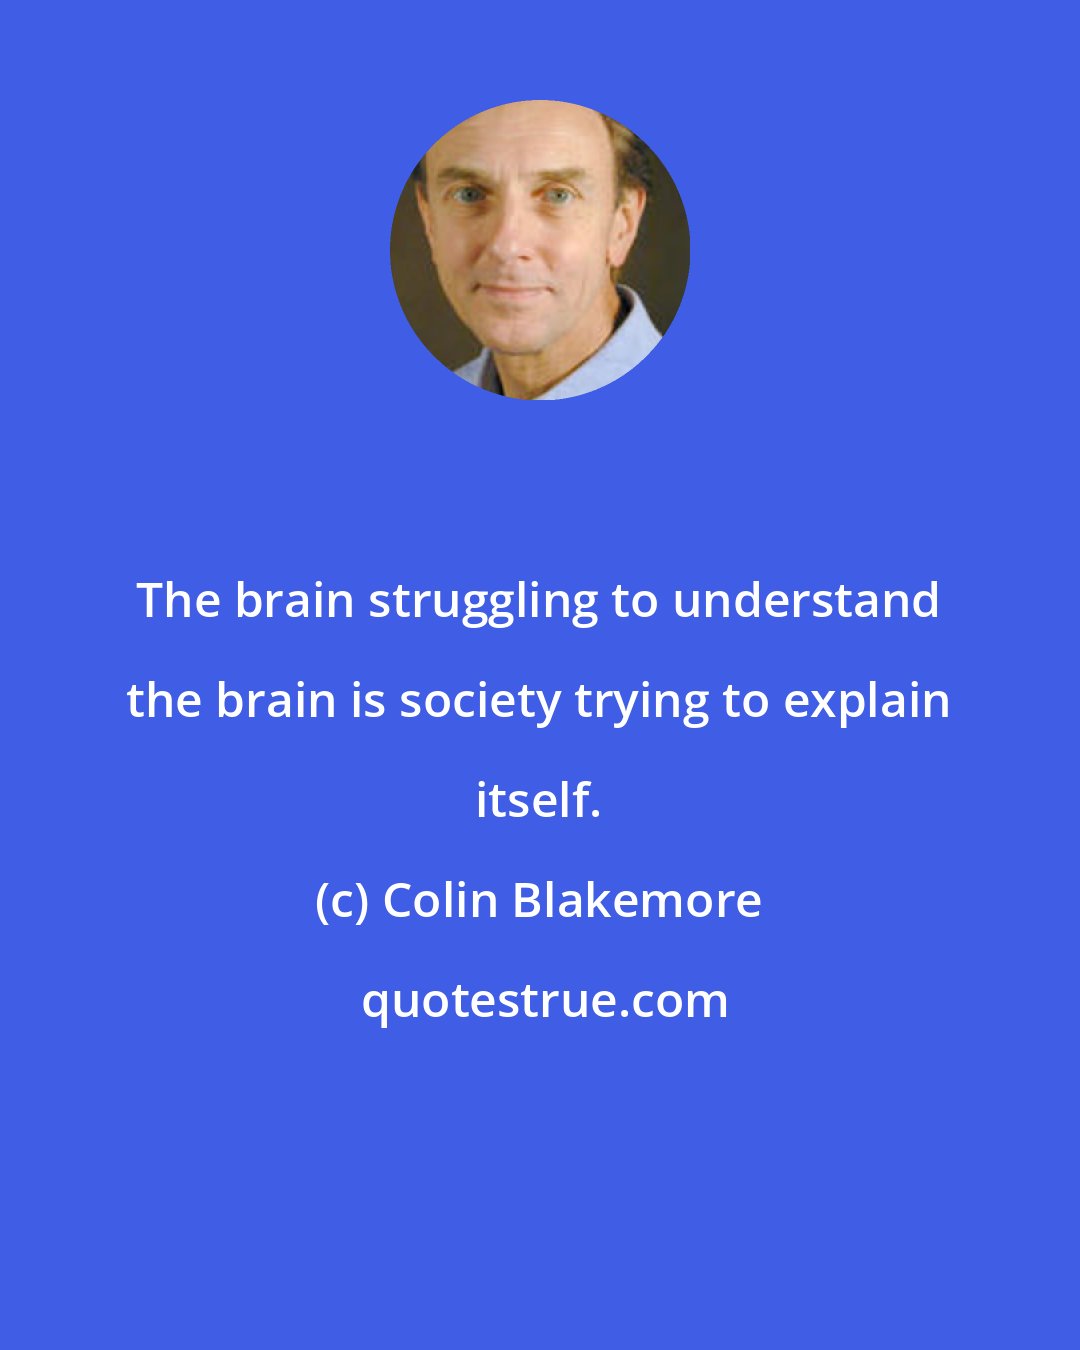 Colin Blakemore: The brain struggling to understand the brain is society trying to explain itself.